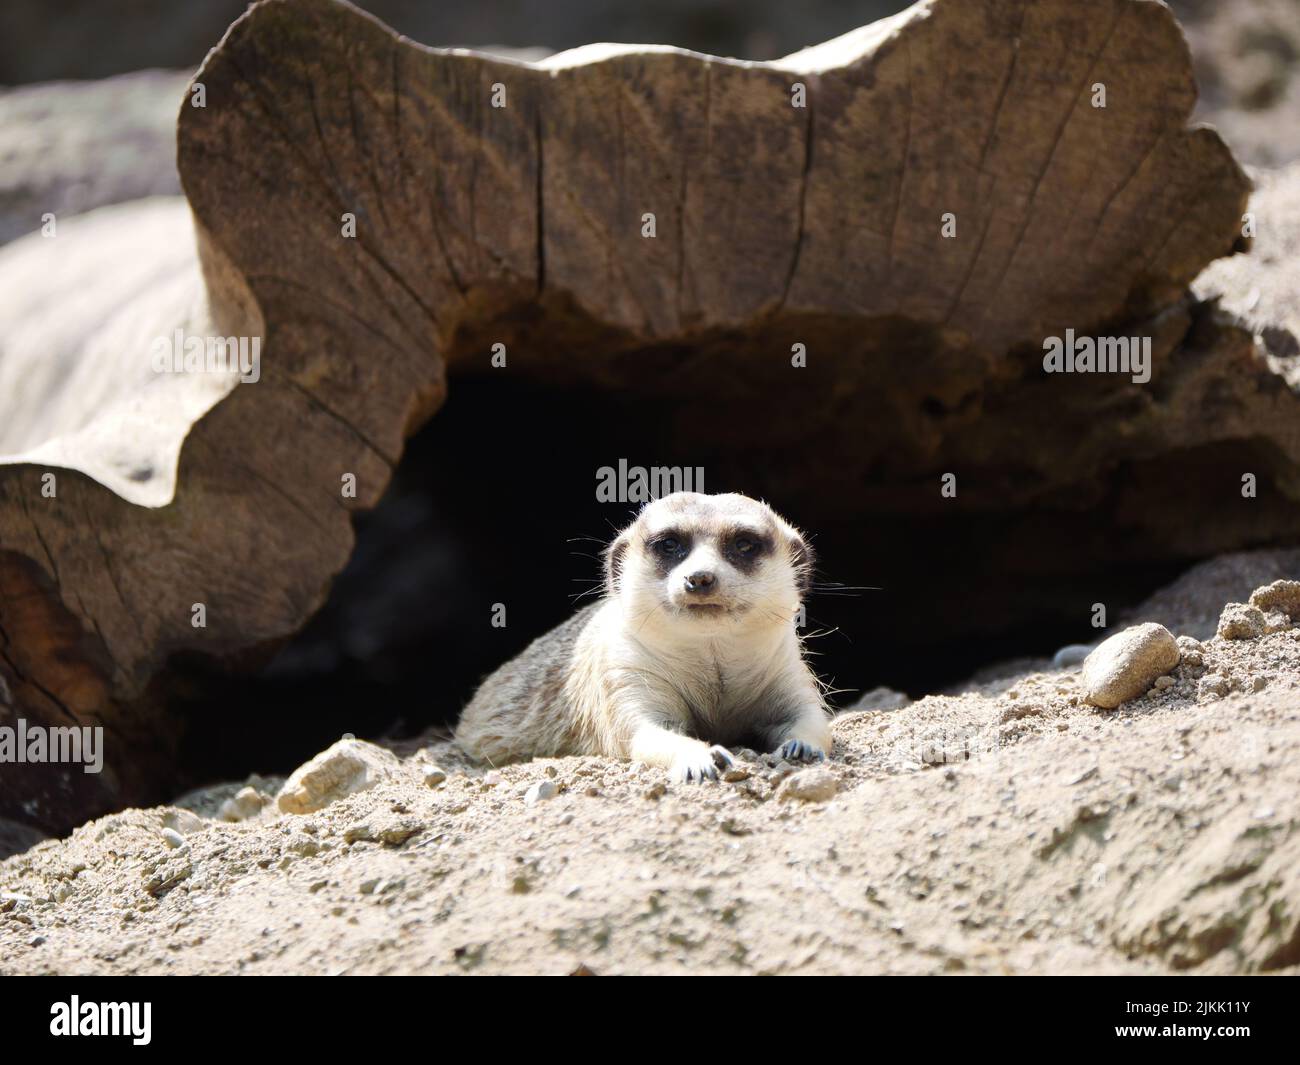 A closeup of a meerkat (Suricata suricatta) that came out of its wooden cave in a safari park or zoo Stock Photo